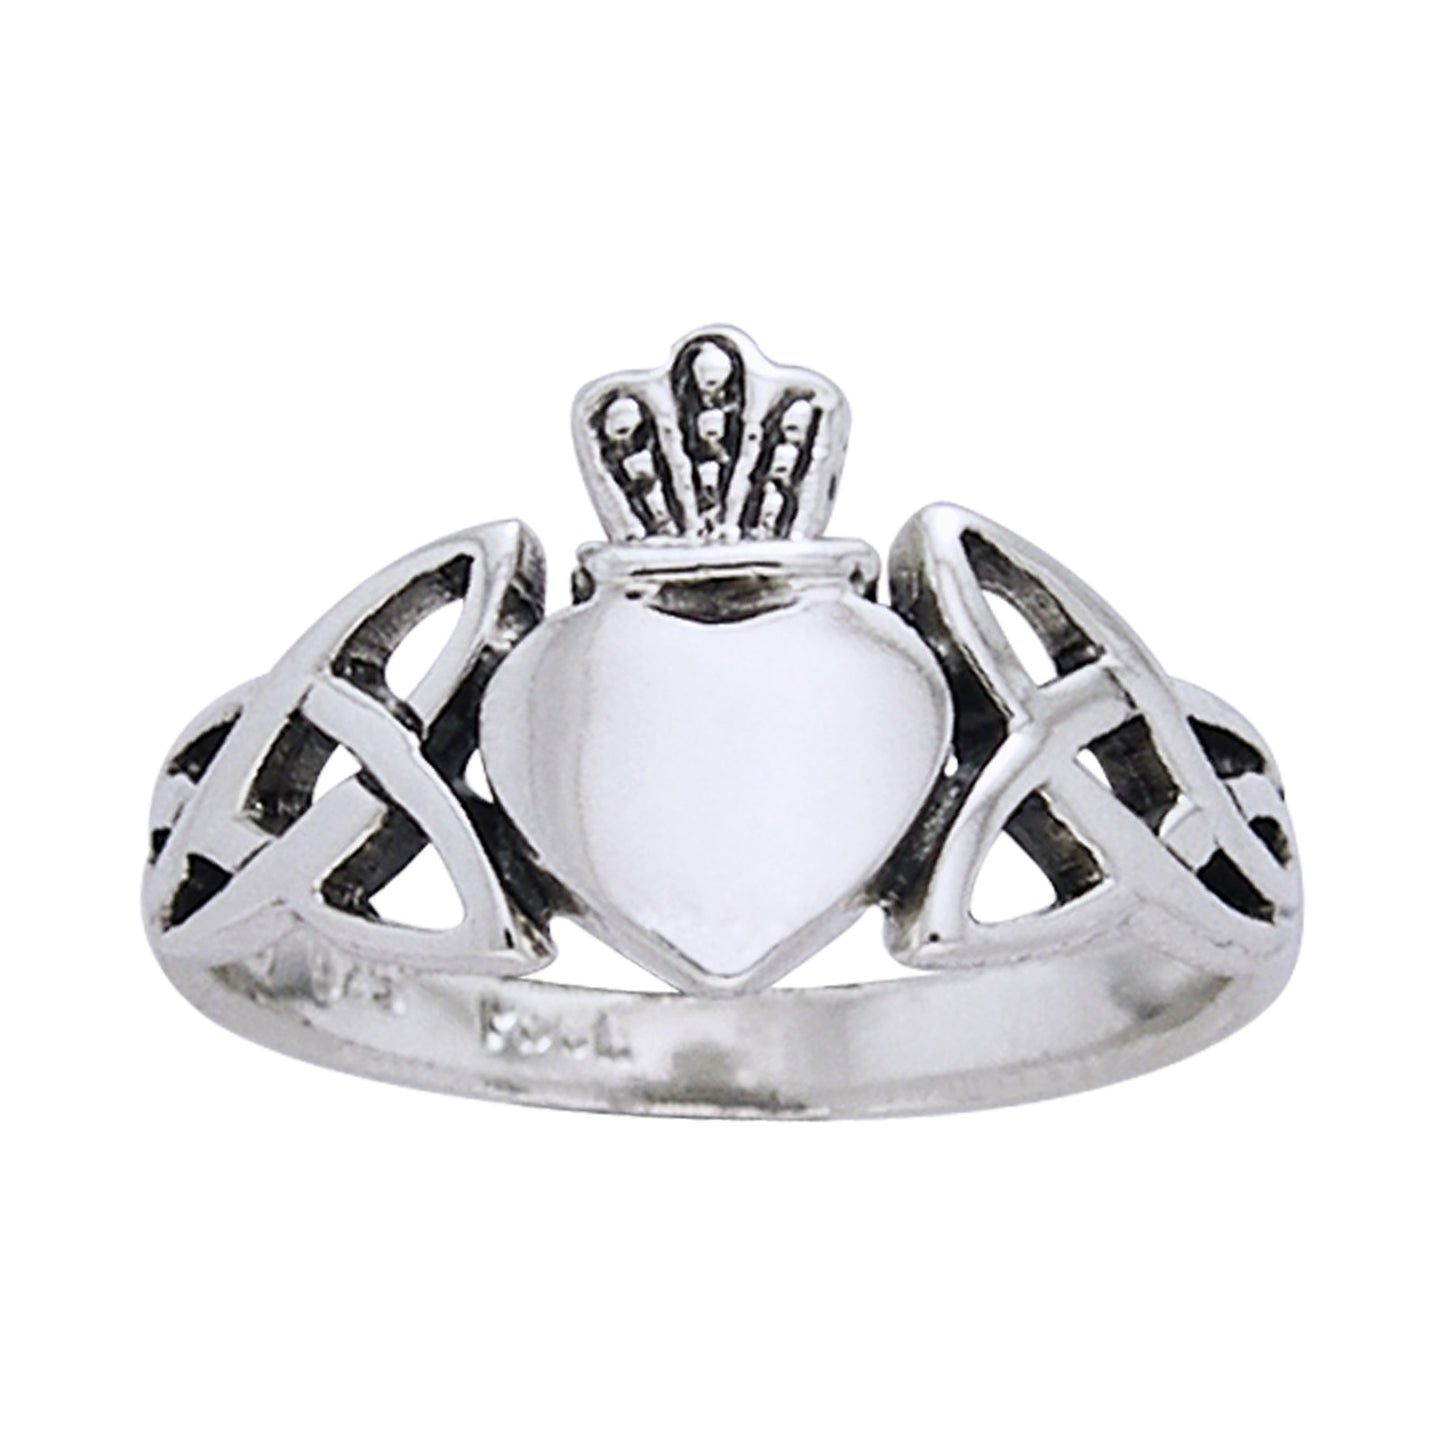 Classic Irish Claddagh Celtic Knotwork Sterling Silver Ring - Silver Insanity